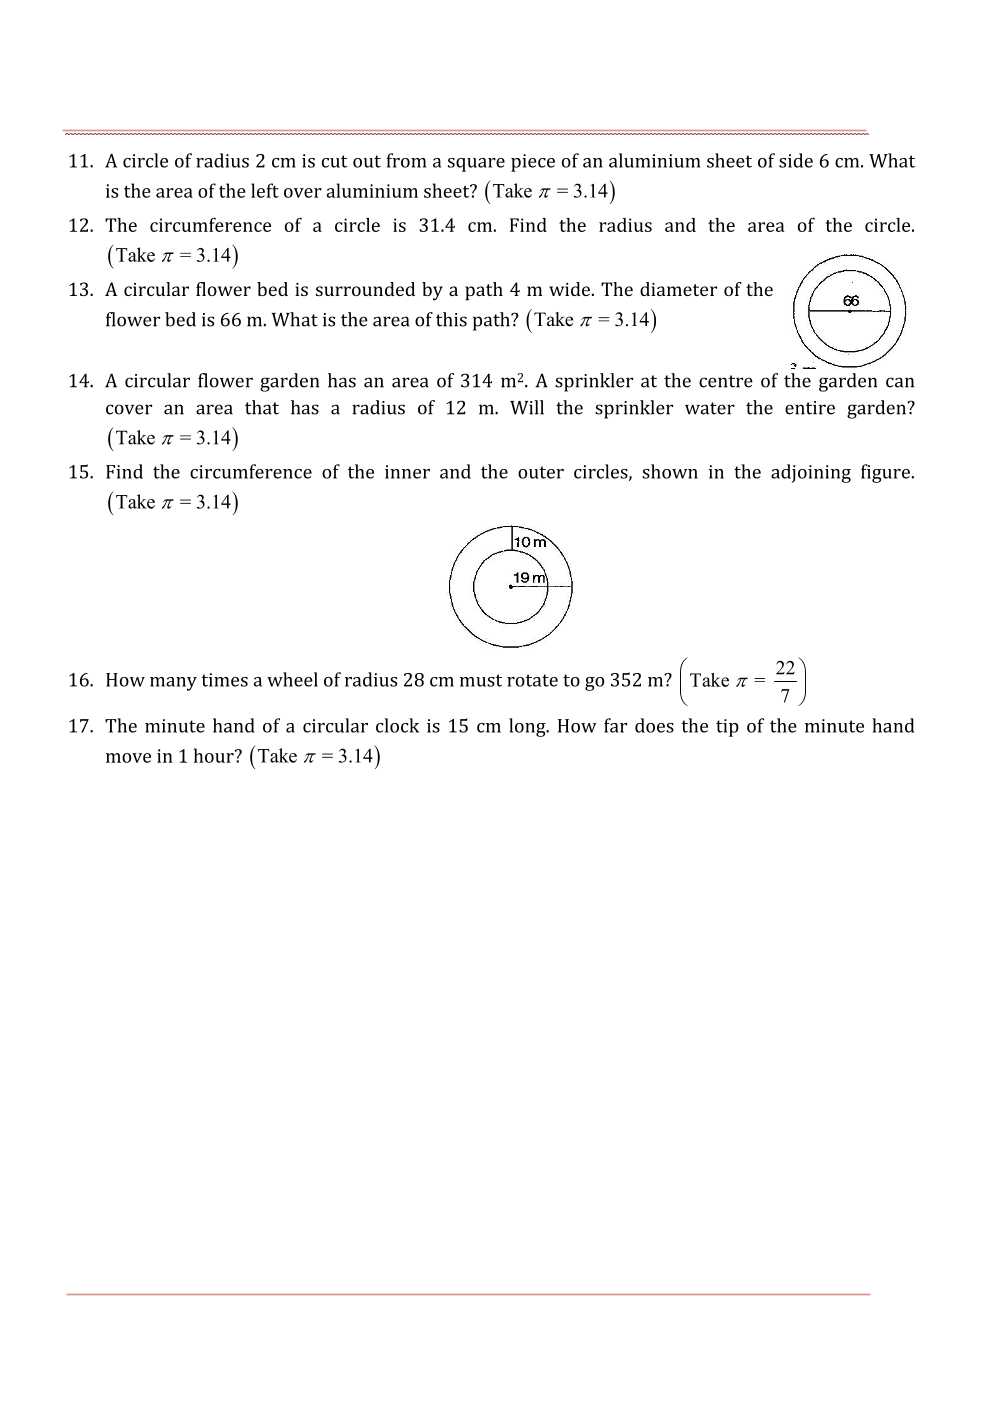 NCERT Solutions For Class 7 Maths Chapter 11 Perimeter and Area